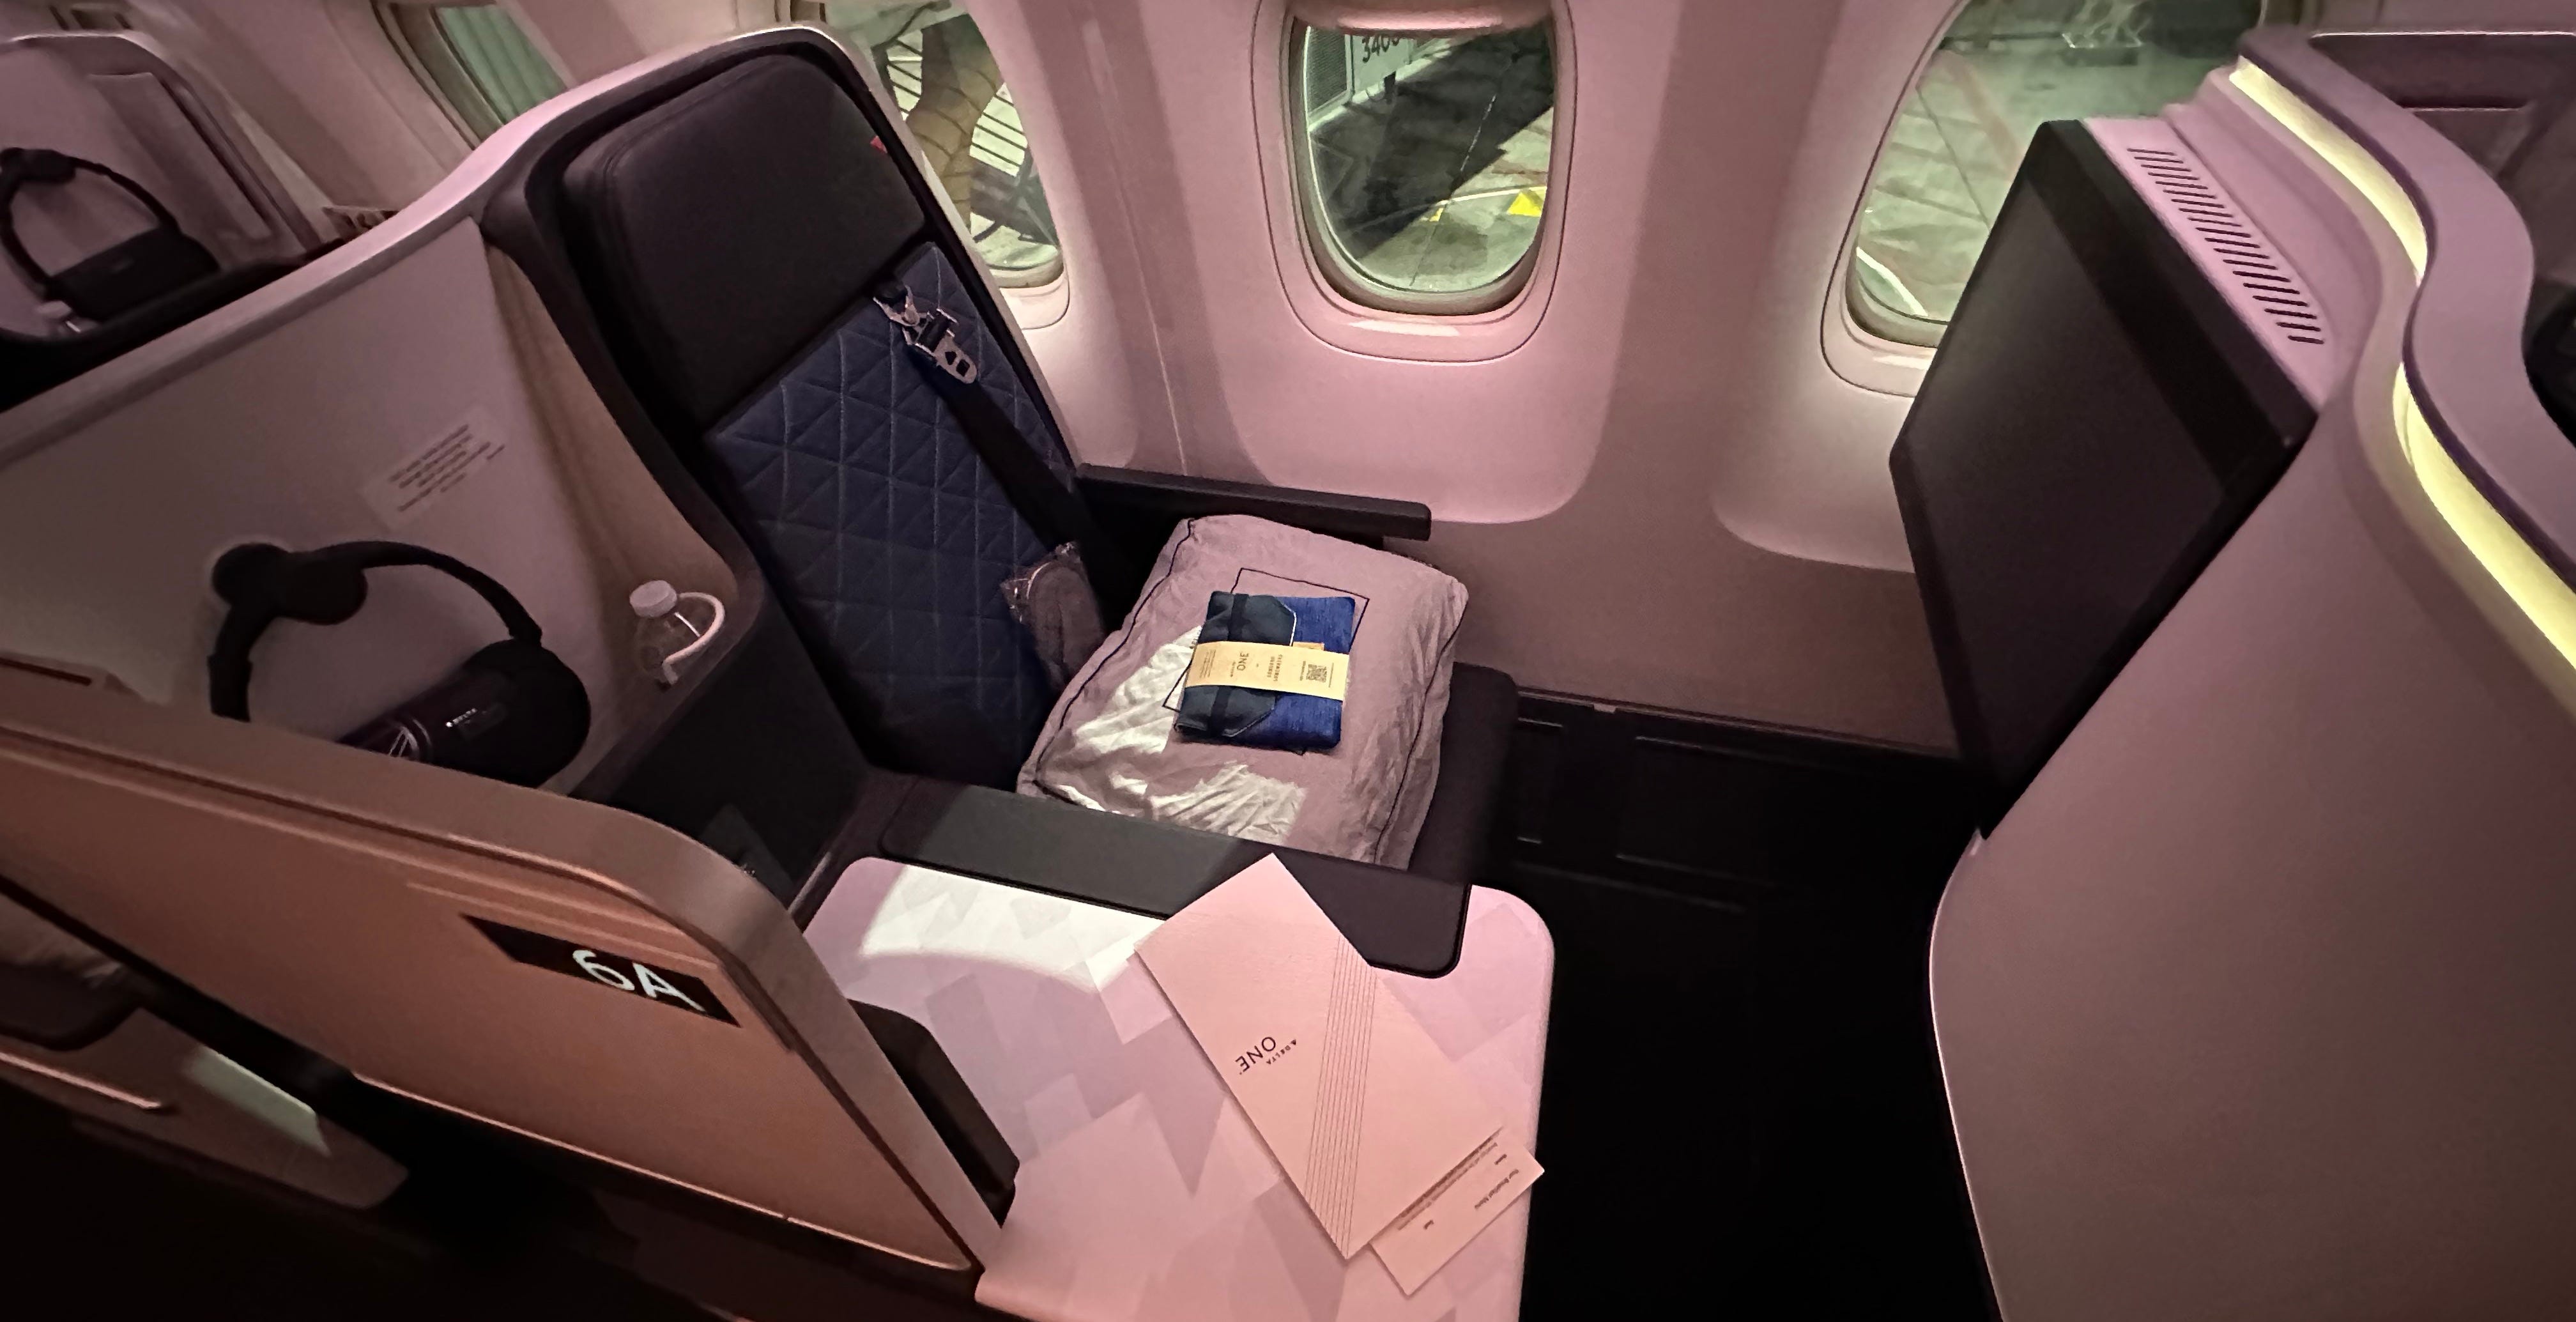 Review: Delta One business class